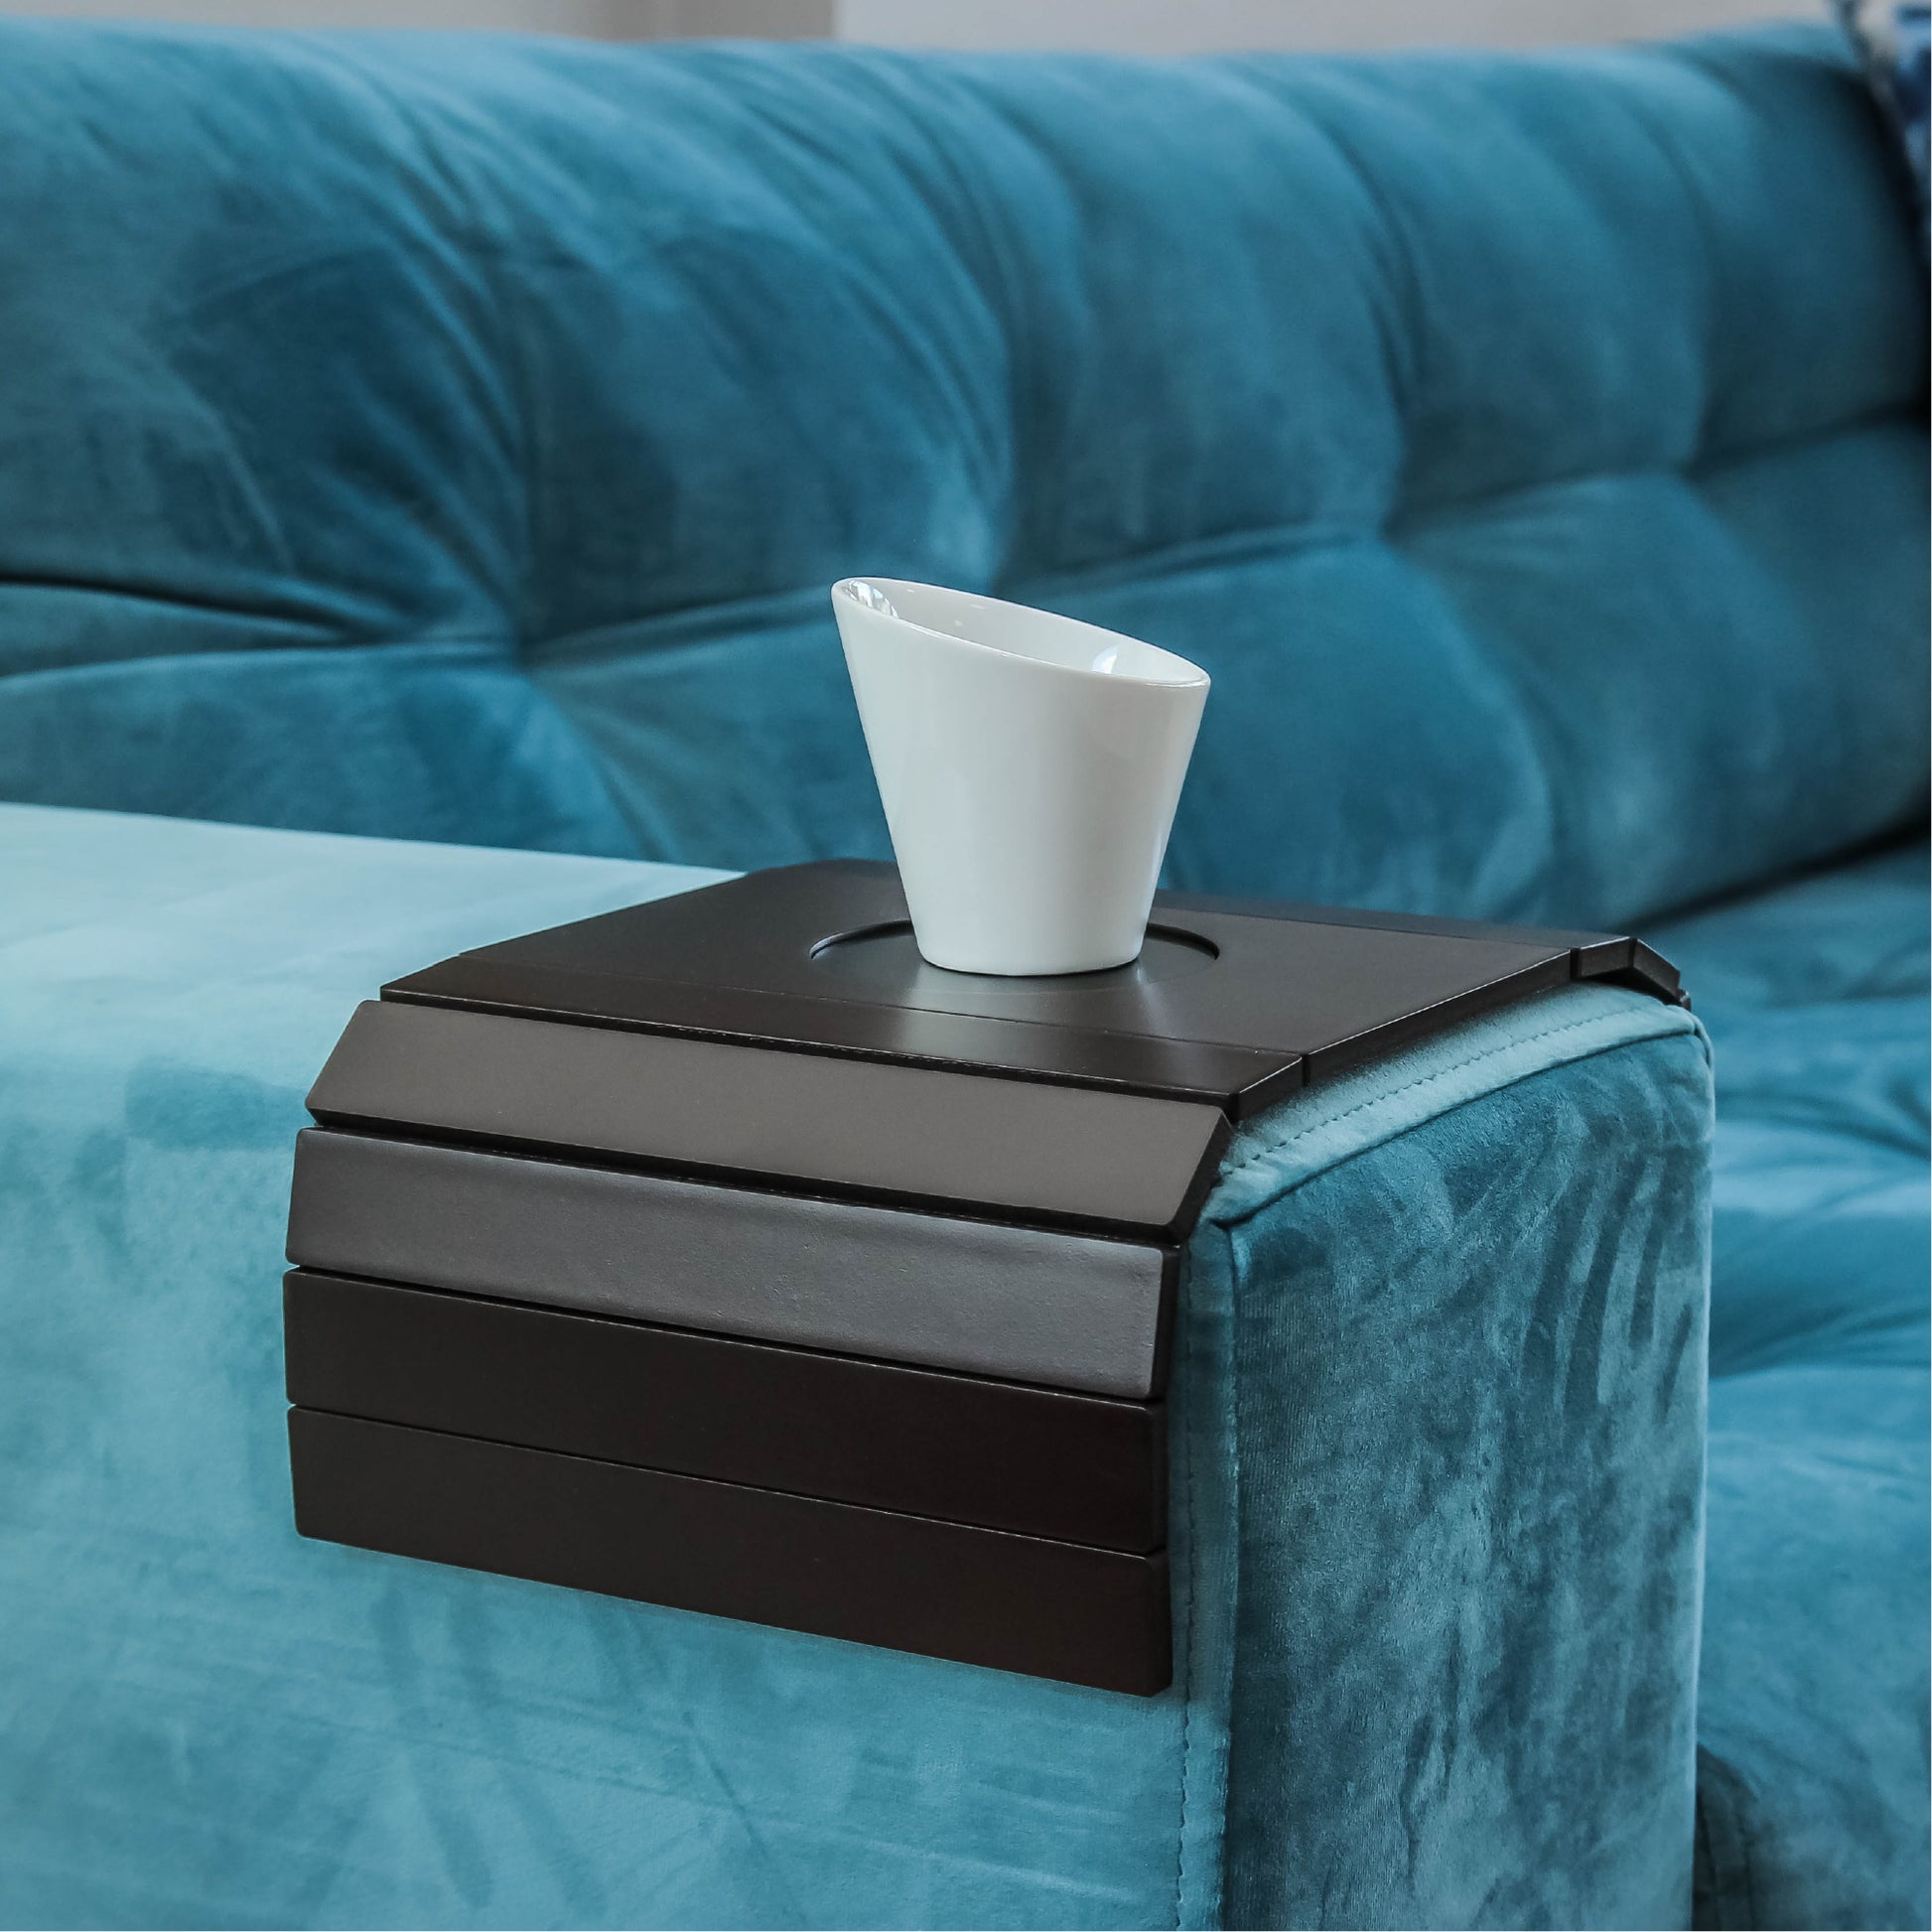 Sofa Couch Tray Table With Cup Holder